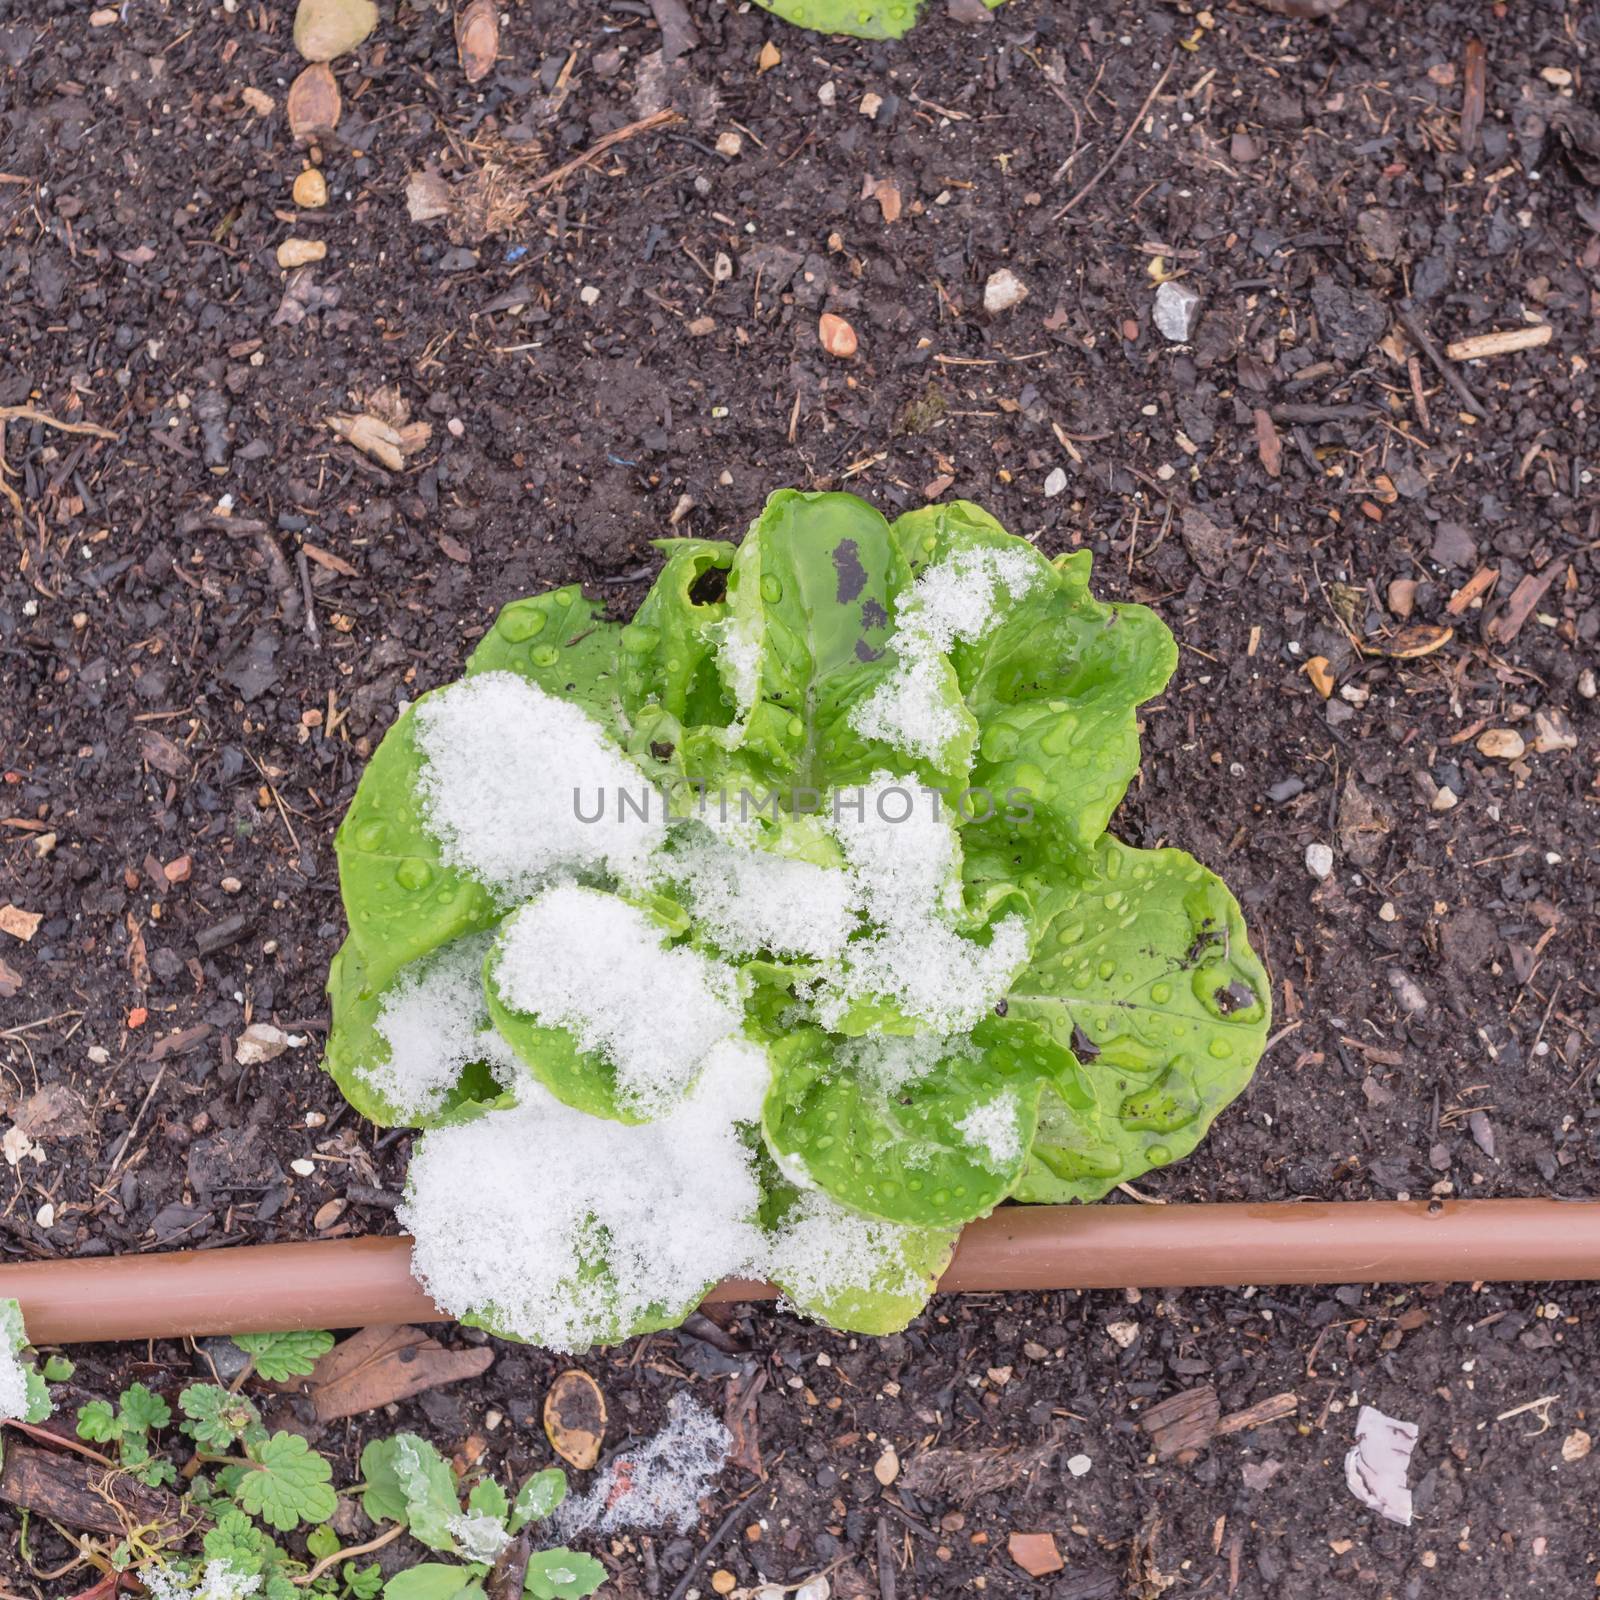 Top view one lettuce plant with snow covered at community garden near Dallas, Texas, America. Organic salad green winter crop with irrigation system and mulch soil